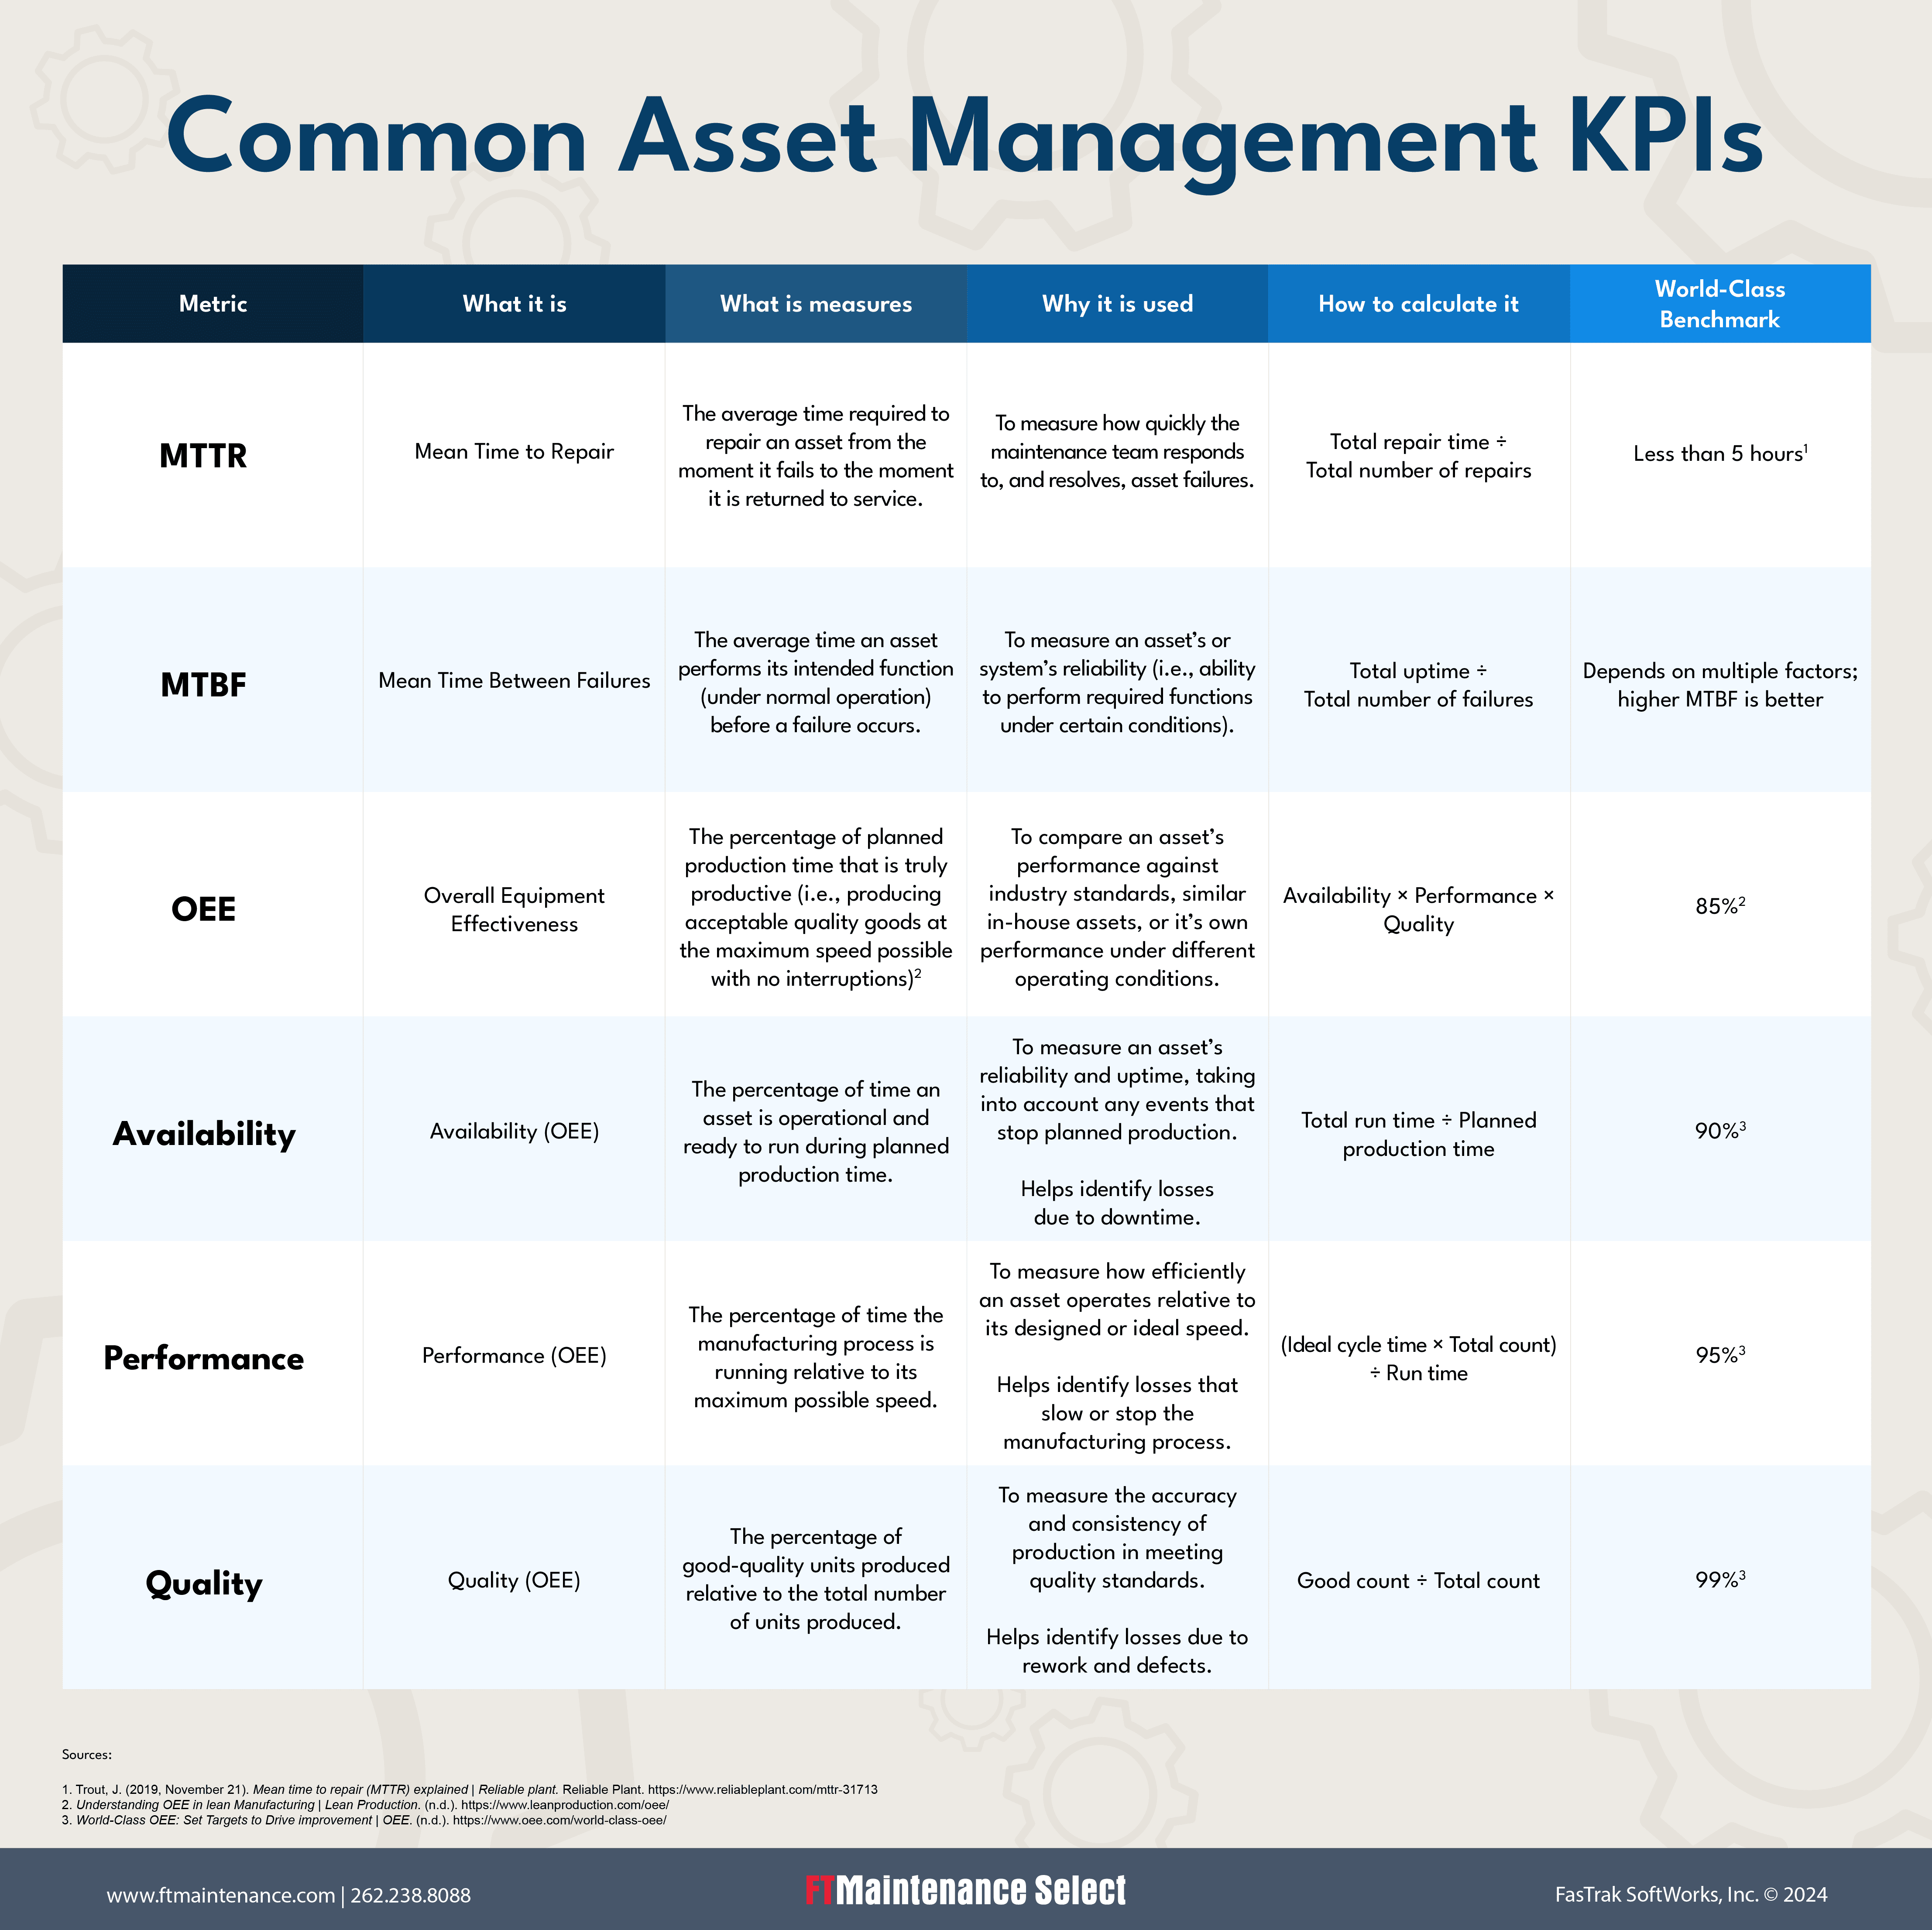 Table showing asset management KPIs, what they measure, why they are used, how to calculate them, and world class benchmarks